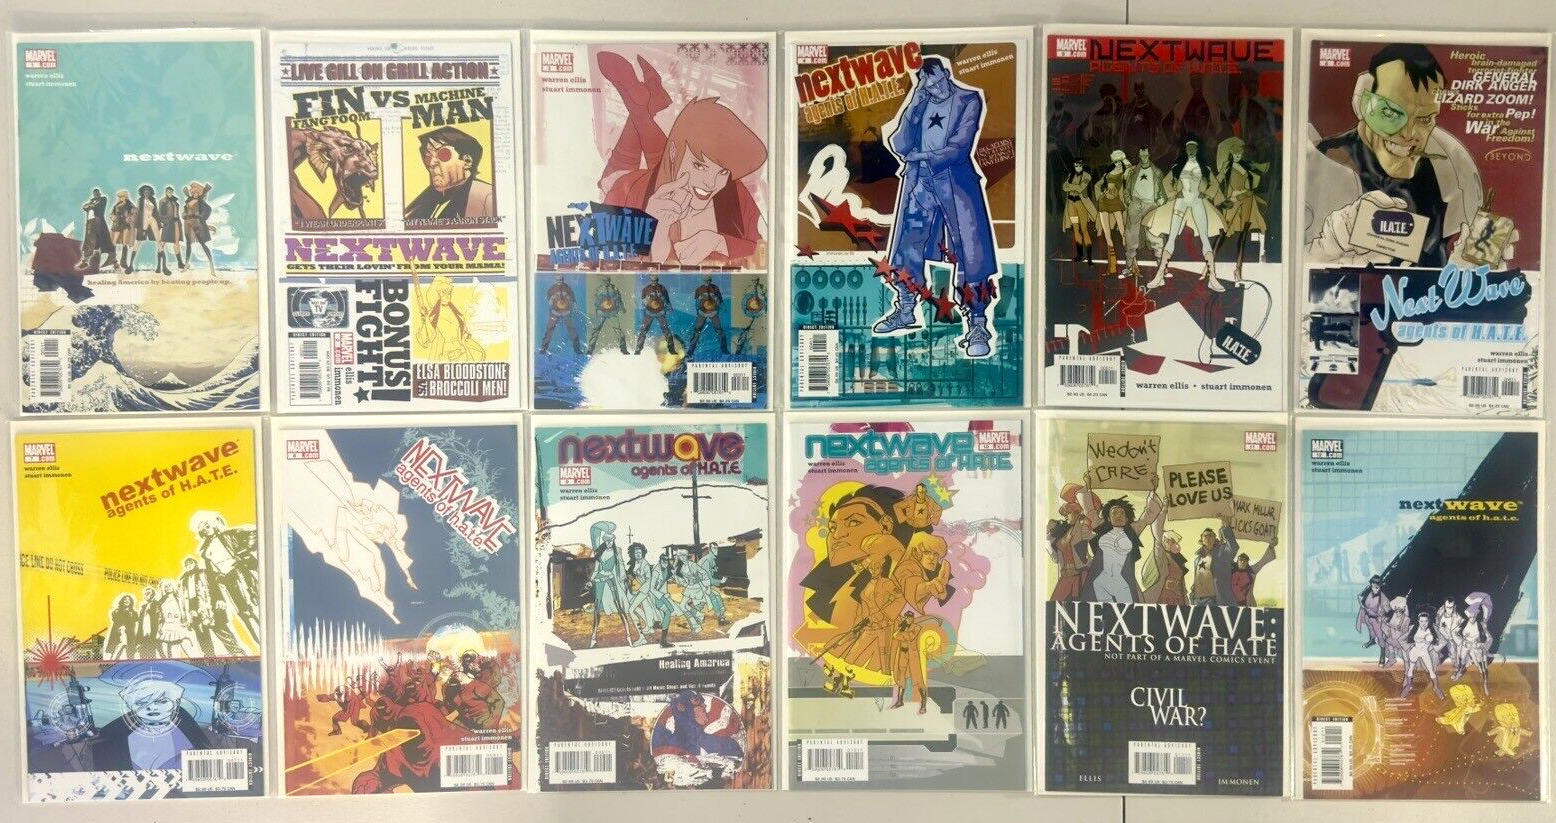 Nextwave Agents of HATE 1-12 FULL COMPLETE RUN Marvel 2006 HIGH GRADE NM